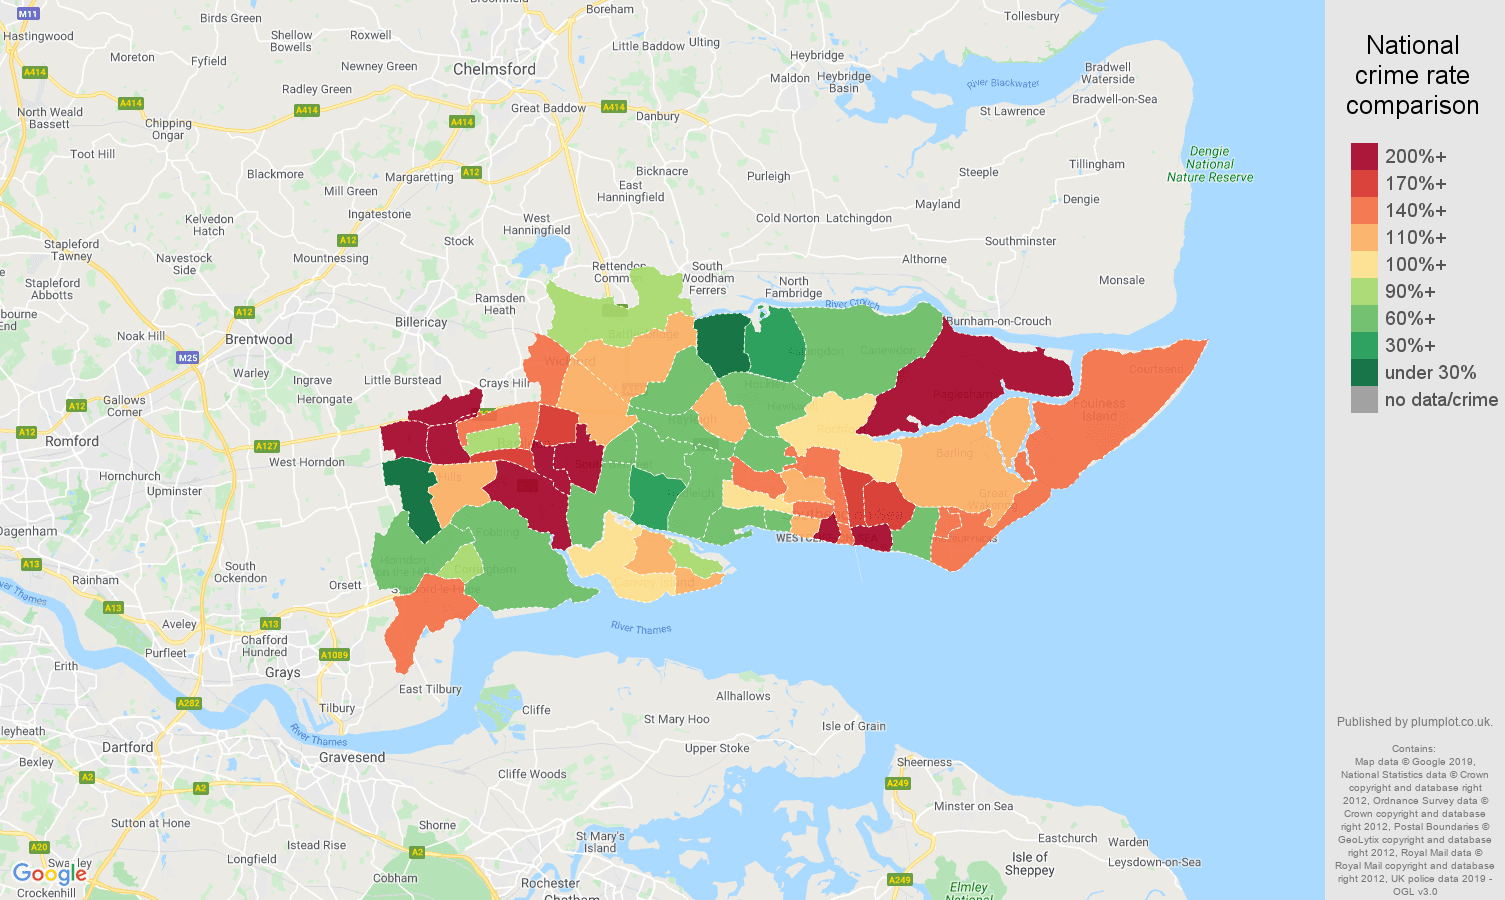 Southend on Sea other crime rate comparison map